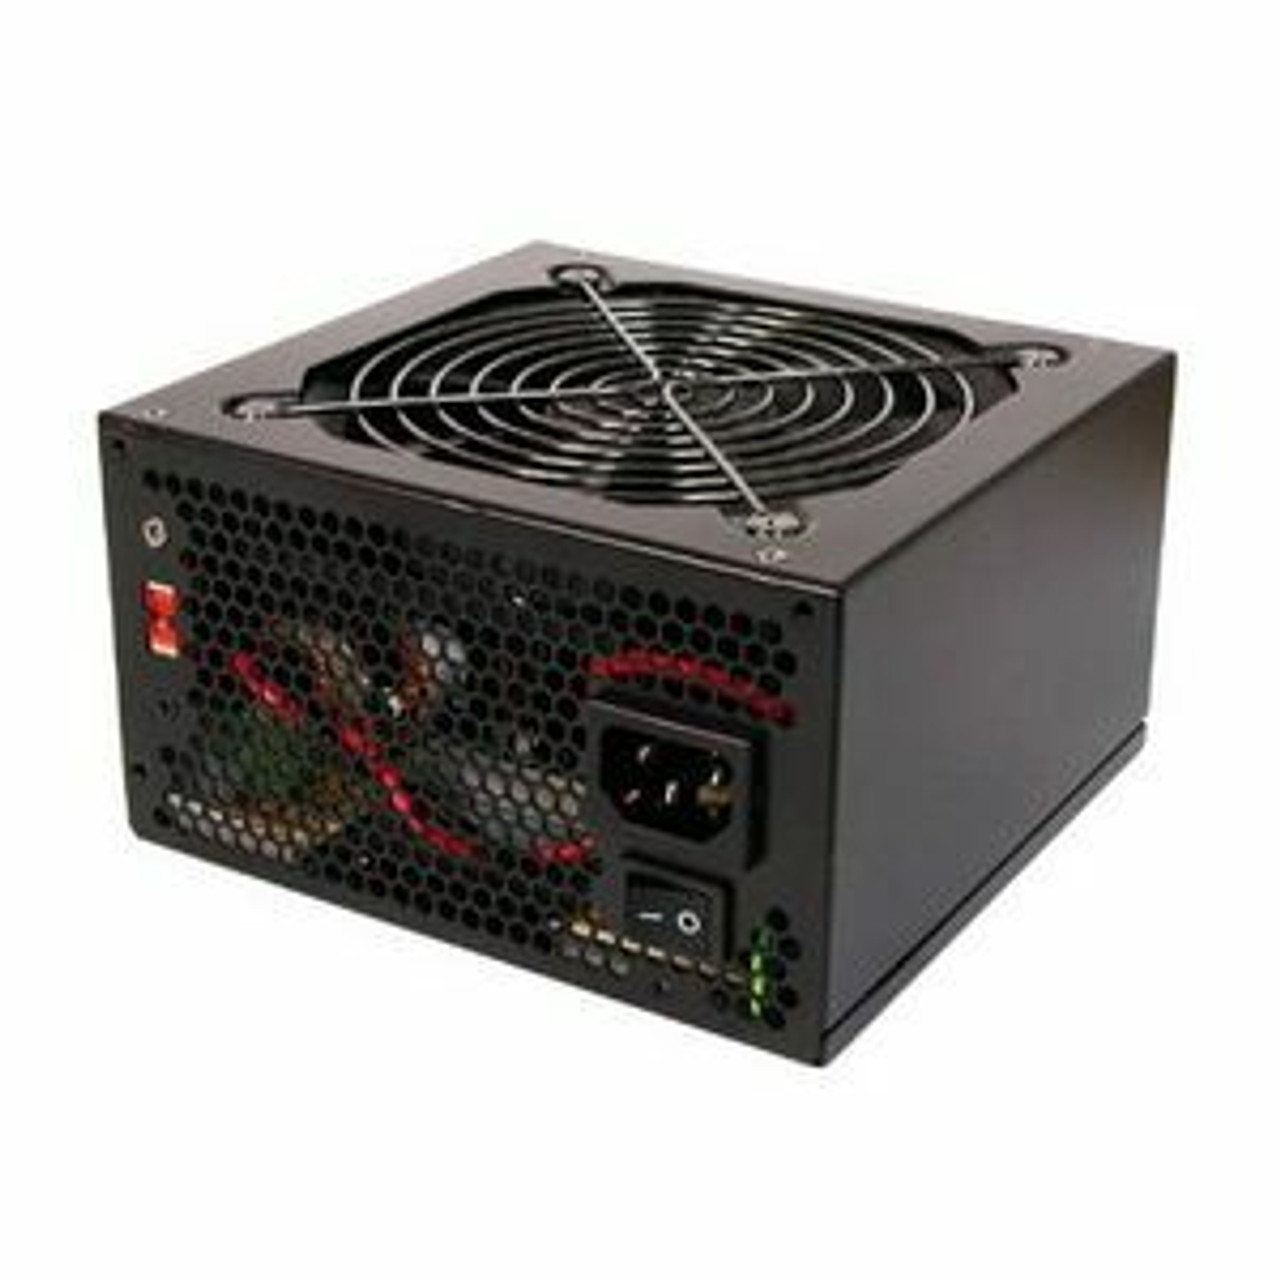 713001180 Cooler Master Extreme Power 600-Watts ATX12V AC Power Supply